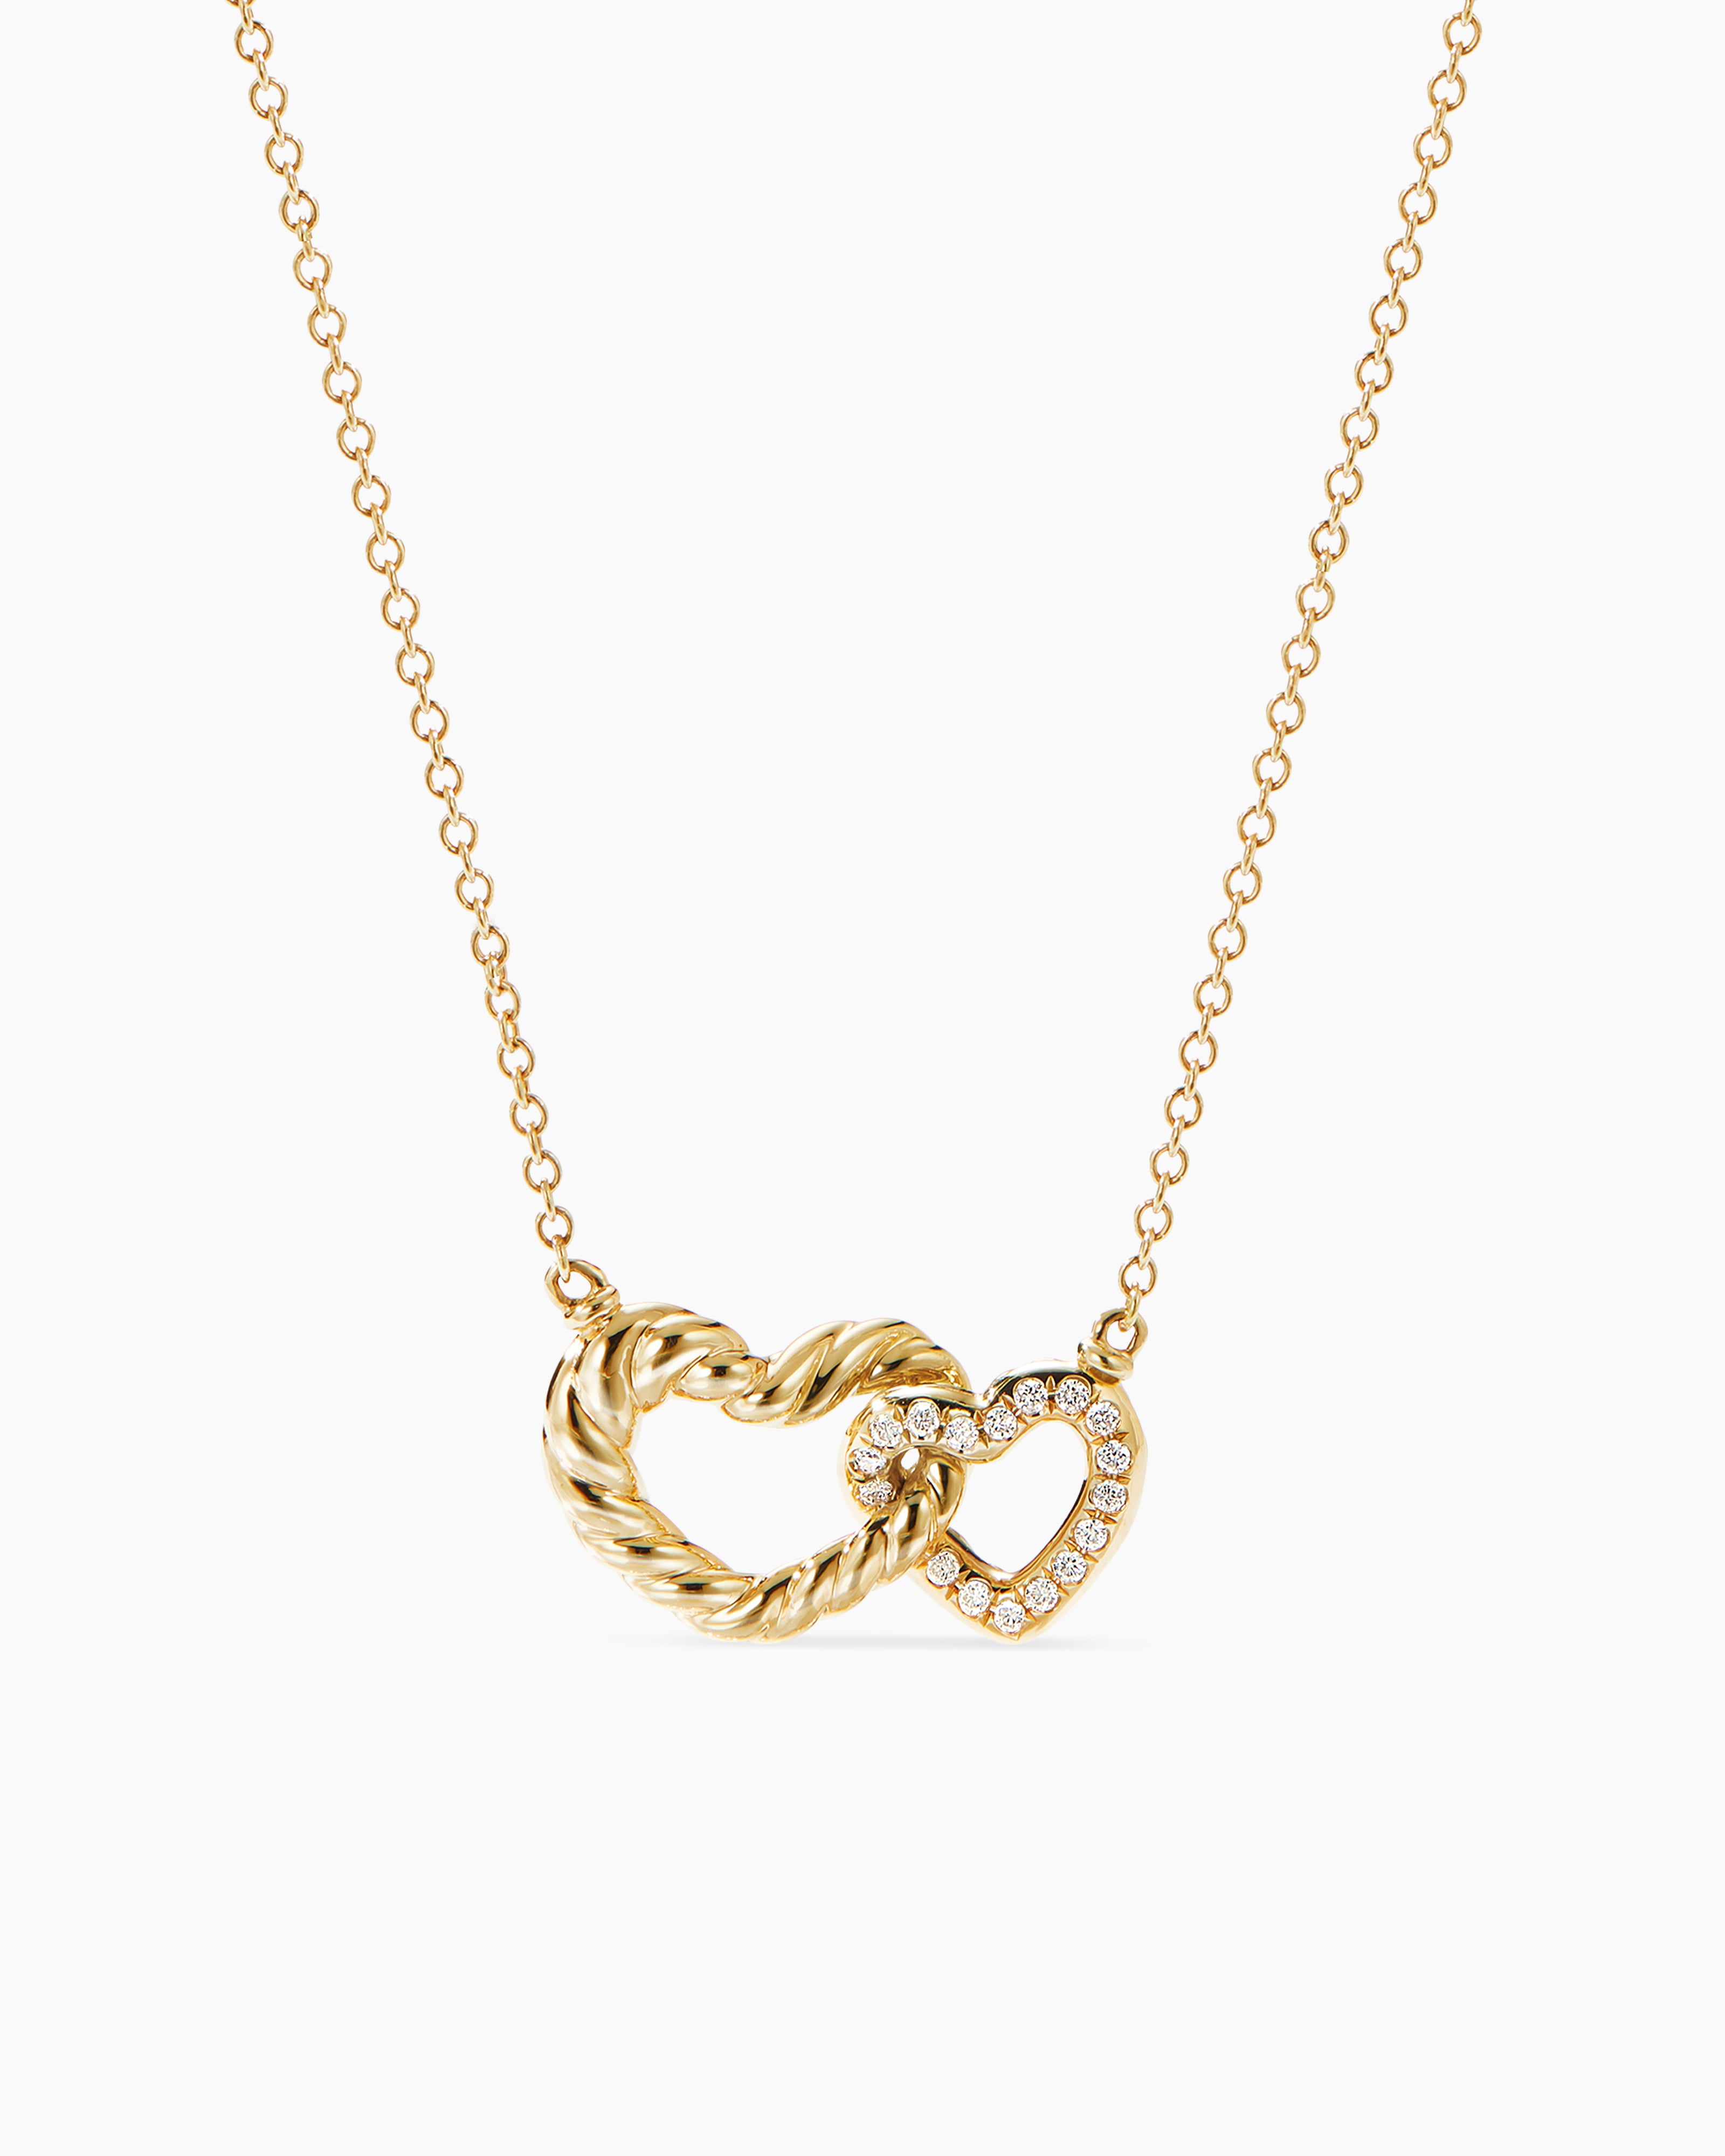 Gold Heart Necklace Gold Cable Chain Necklace Gold Chain 